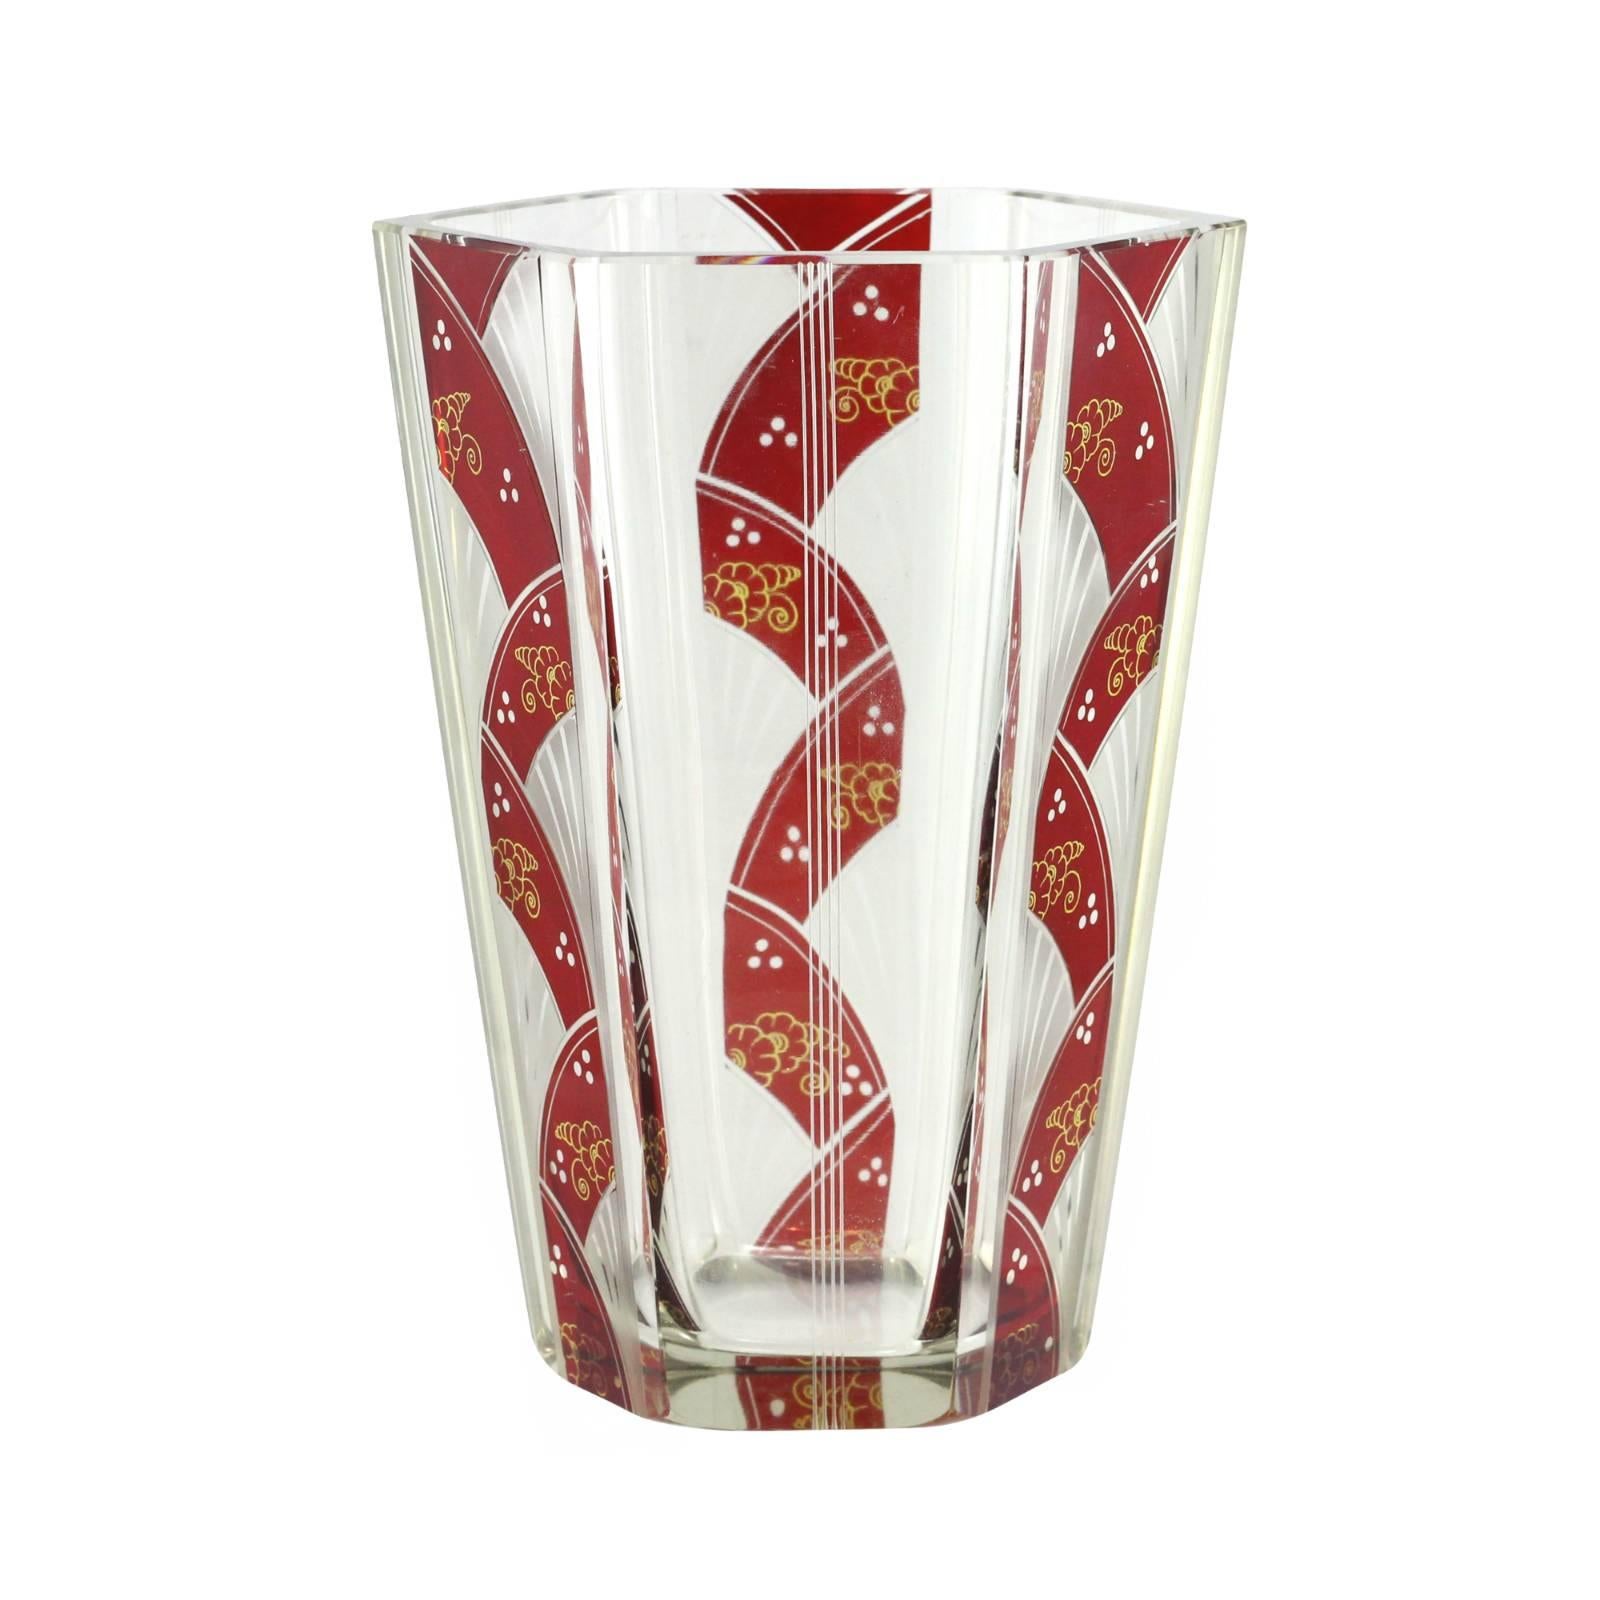 An early 20th century hexagonal Art Deco Bohemian glass vase by Karl Palda. Three sides of the vase are decorated with red and gold enameled panels, whilst the other three are subtly cut with four straight lines. Based in the Bohemian town of Novy